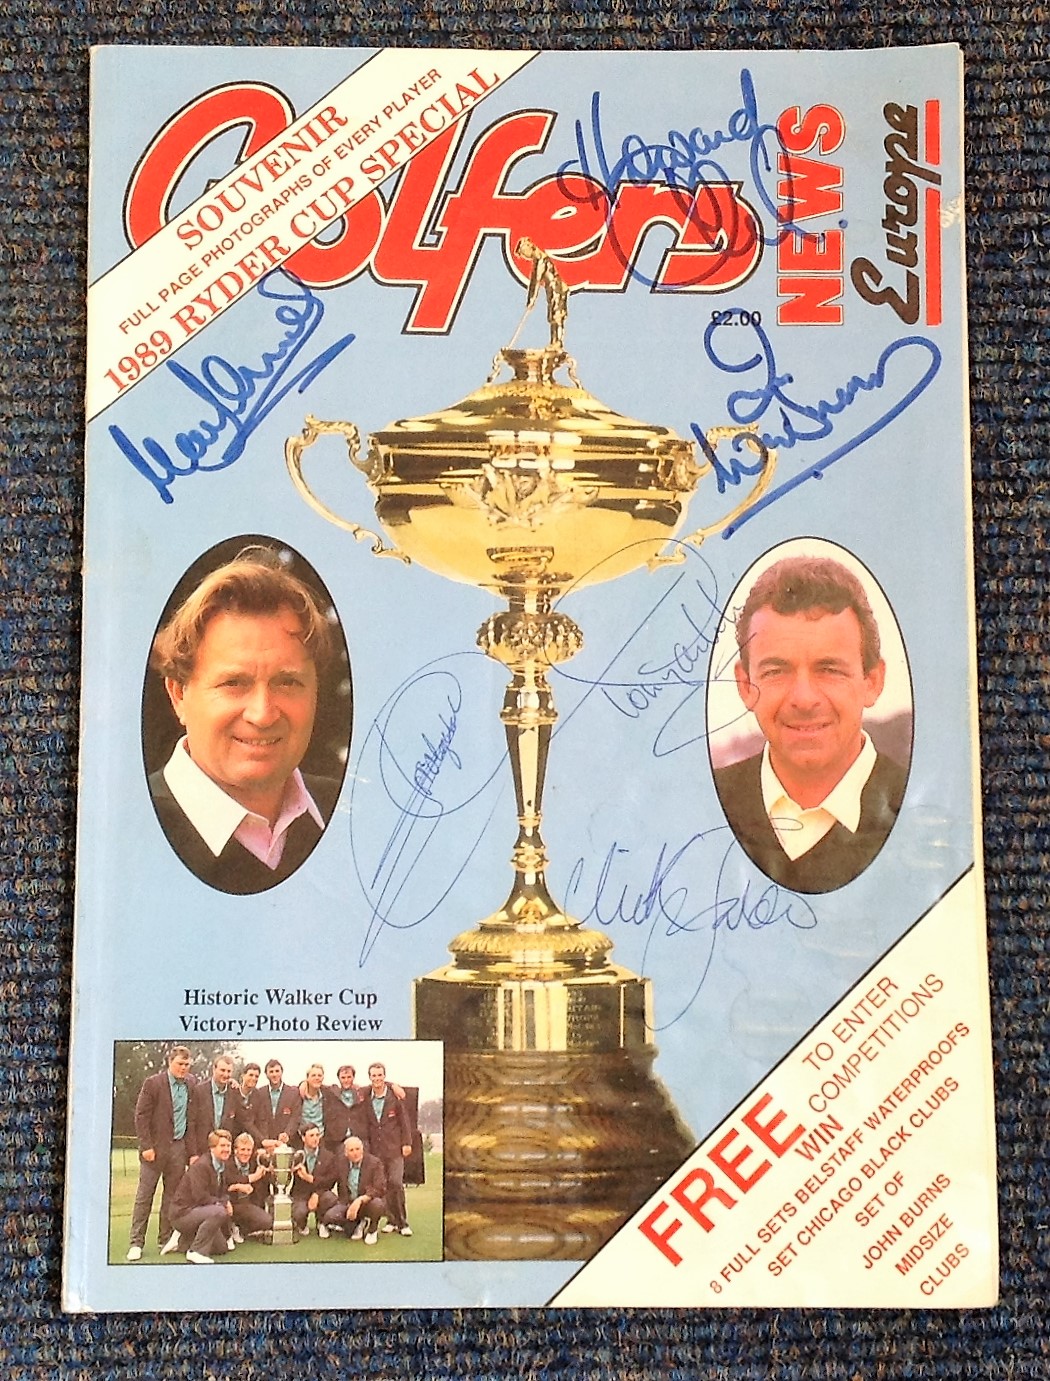 Golf 1989 Ryder Cup signed Golfers News paperback book 12 signatures includes legends of the game